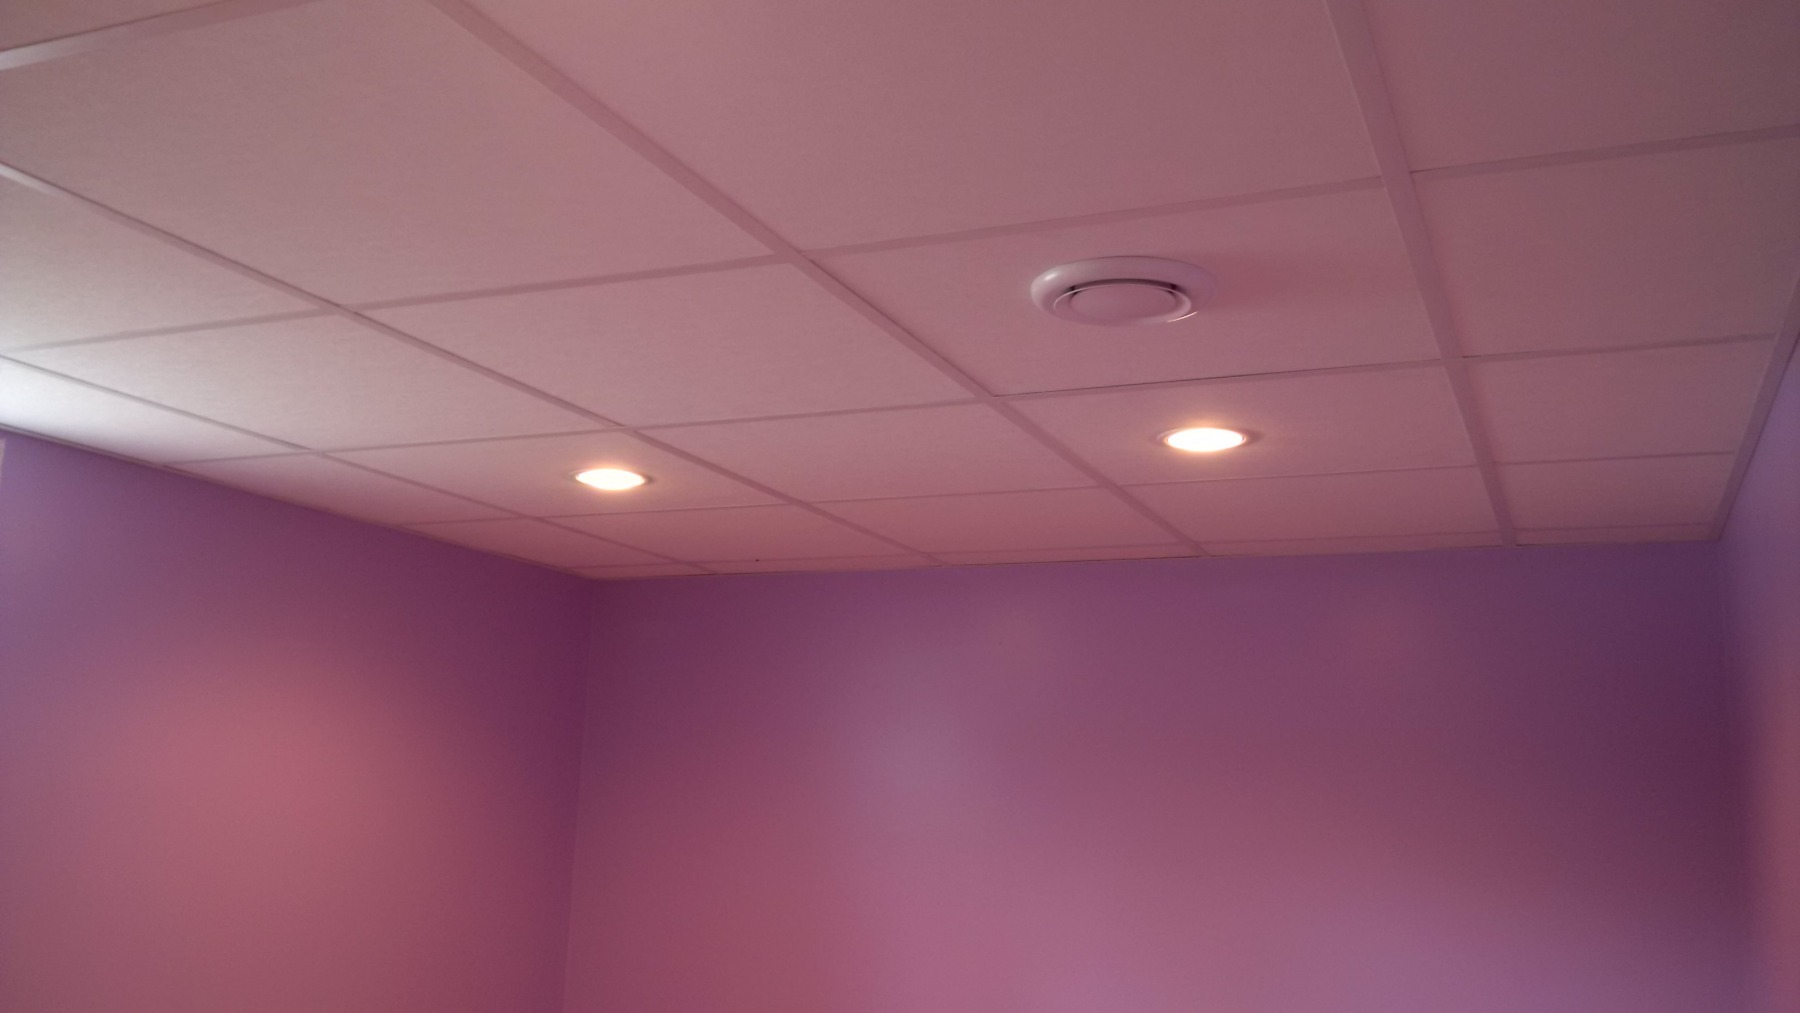 How To Install Can Lights In A Drop Ceiling